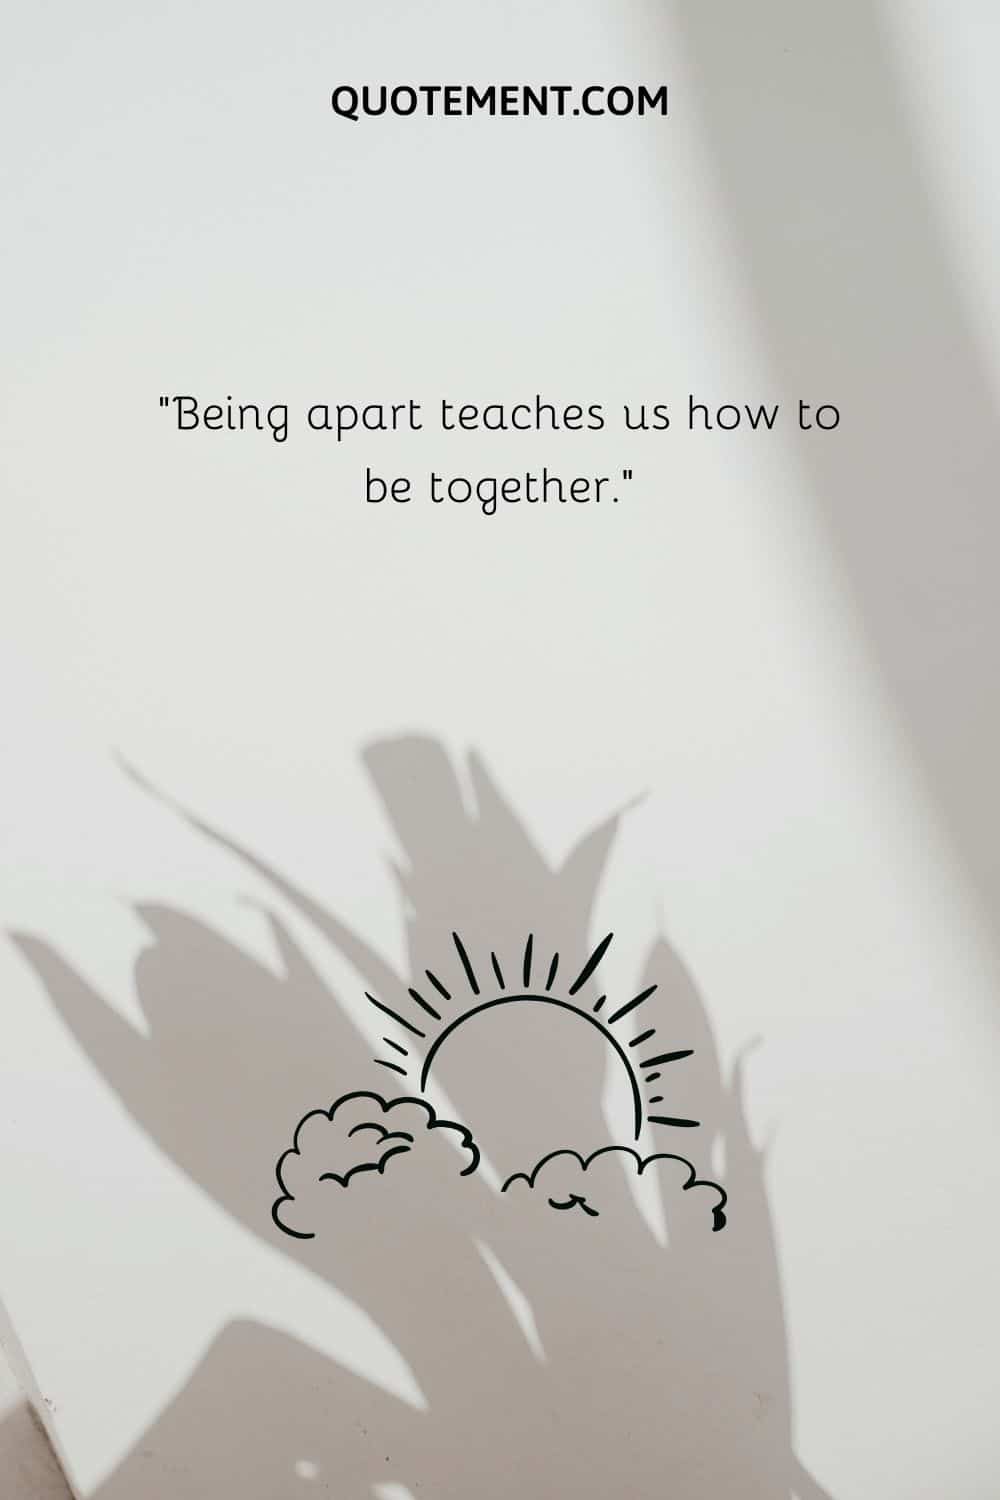 “Being apart teaches us how to be together.”